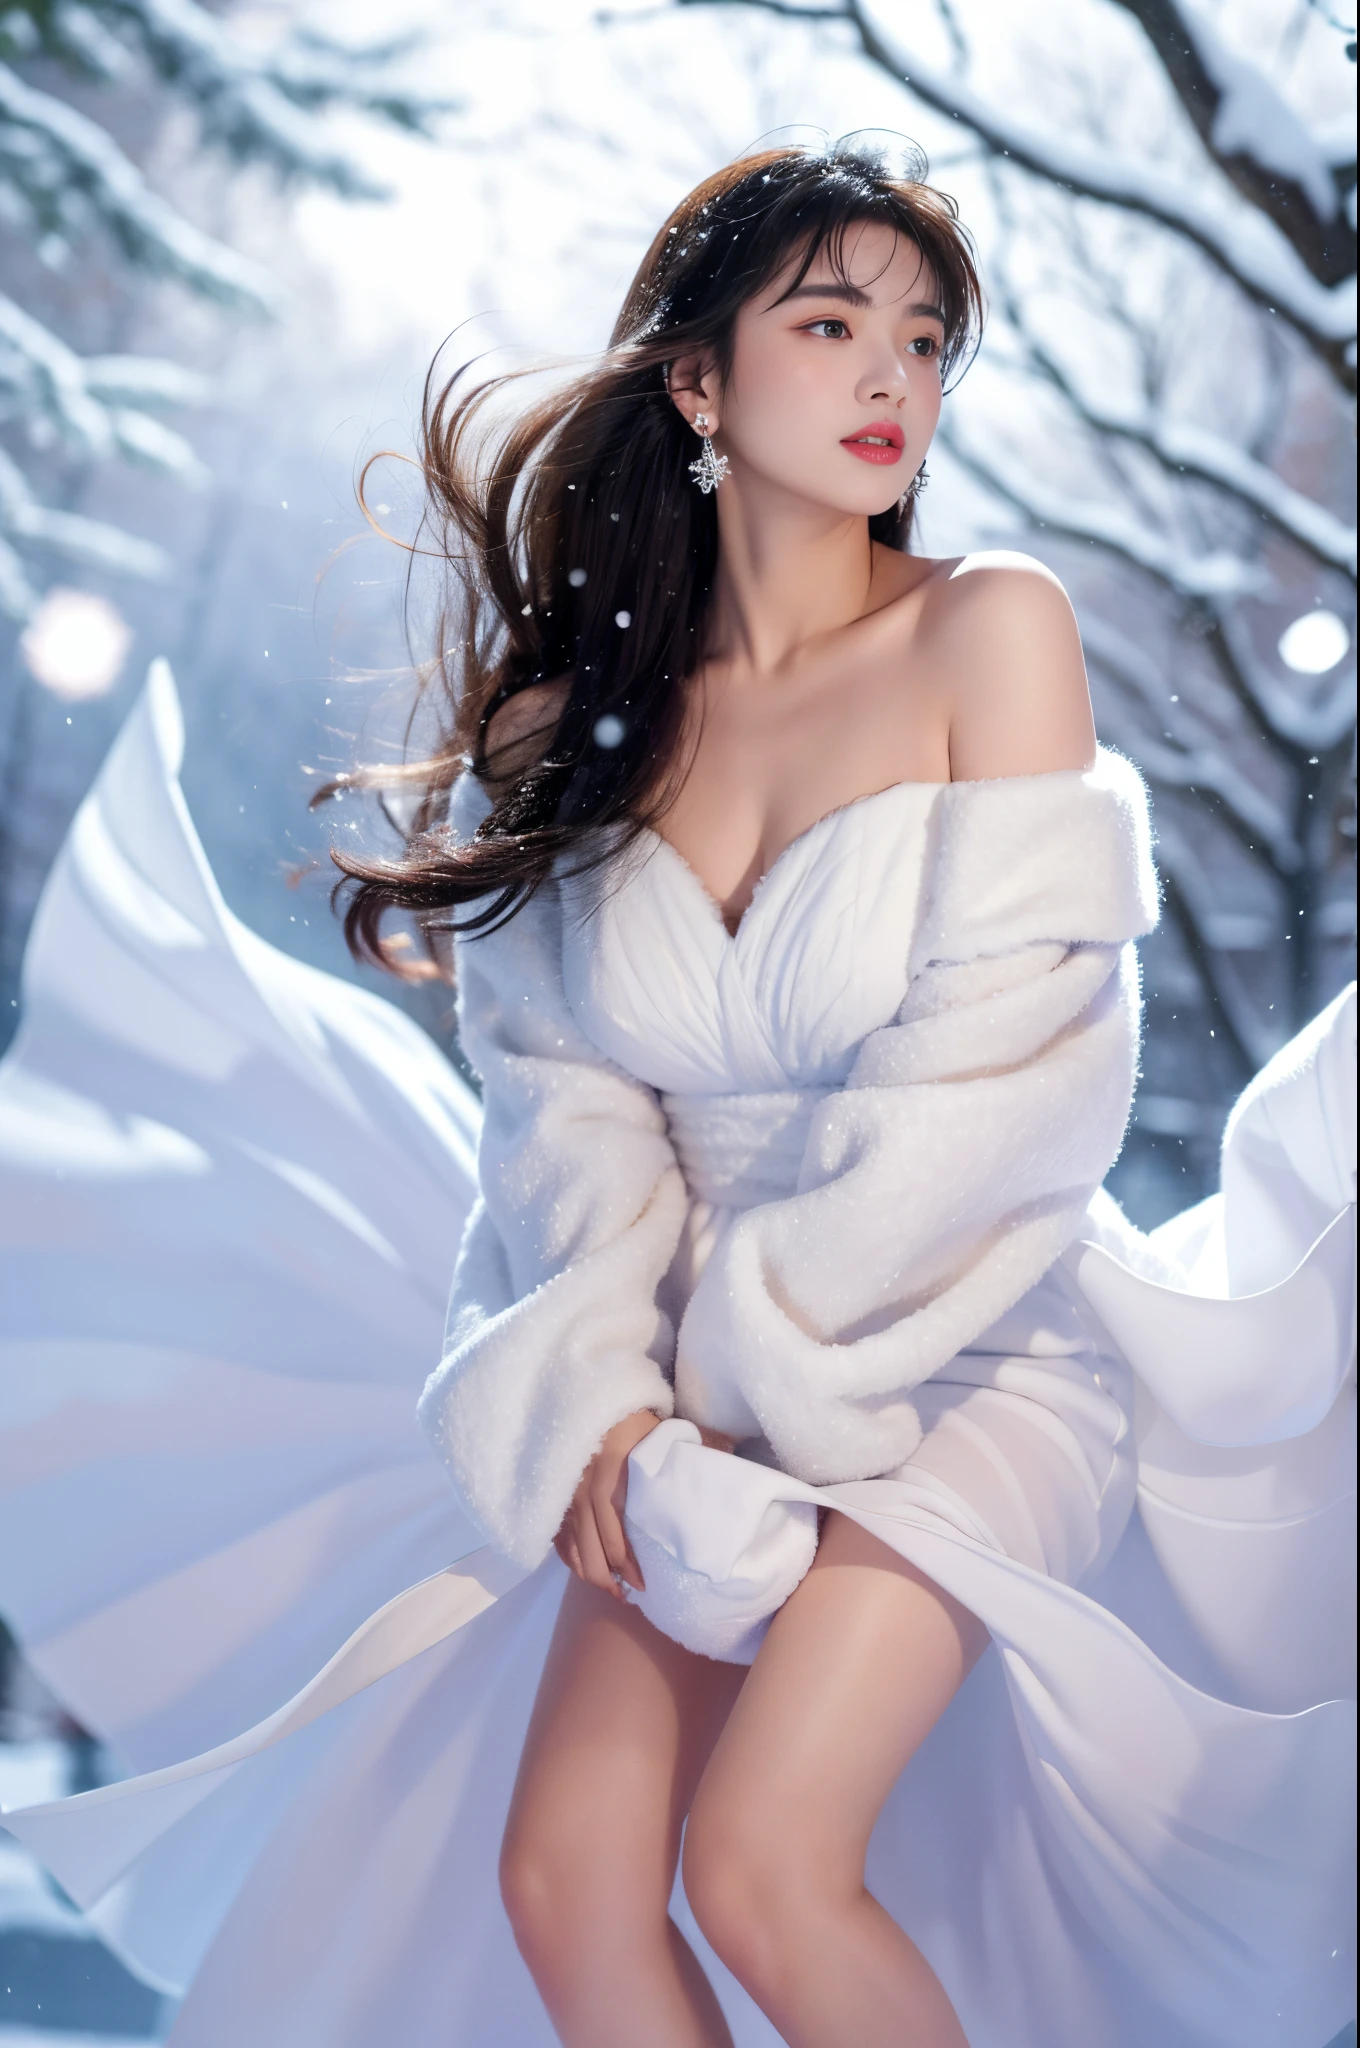 tmasterpiece、quality、ultra - detailed、Marilyn Tugue ， Focus on the thighs and above，Clear face，（Best quality）， beuaty girl：1.5、(Red fluffy off-shoulder dress style)，long hair fluttering，Snowflake earrings、snowflakes falling、bblurry、Snow World